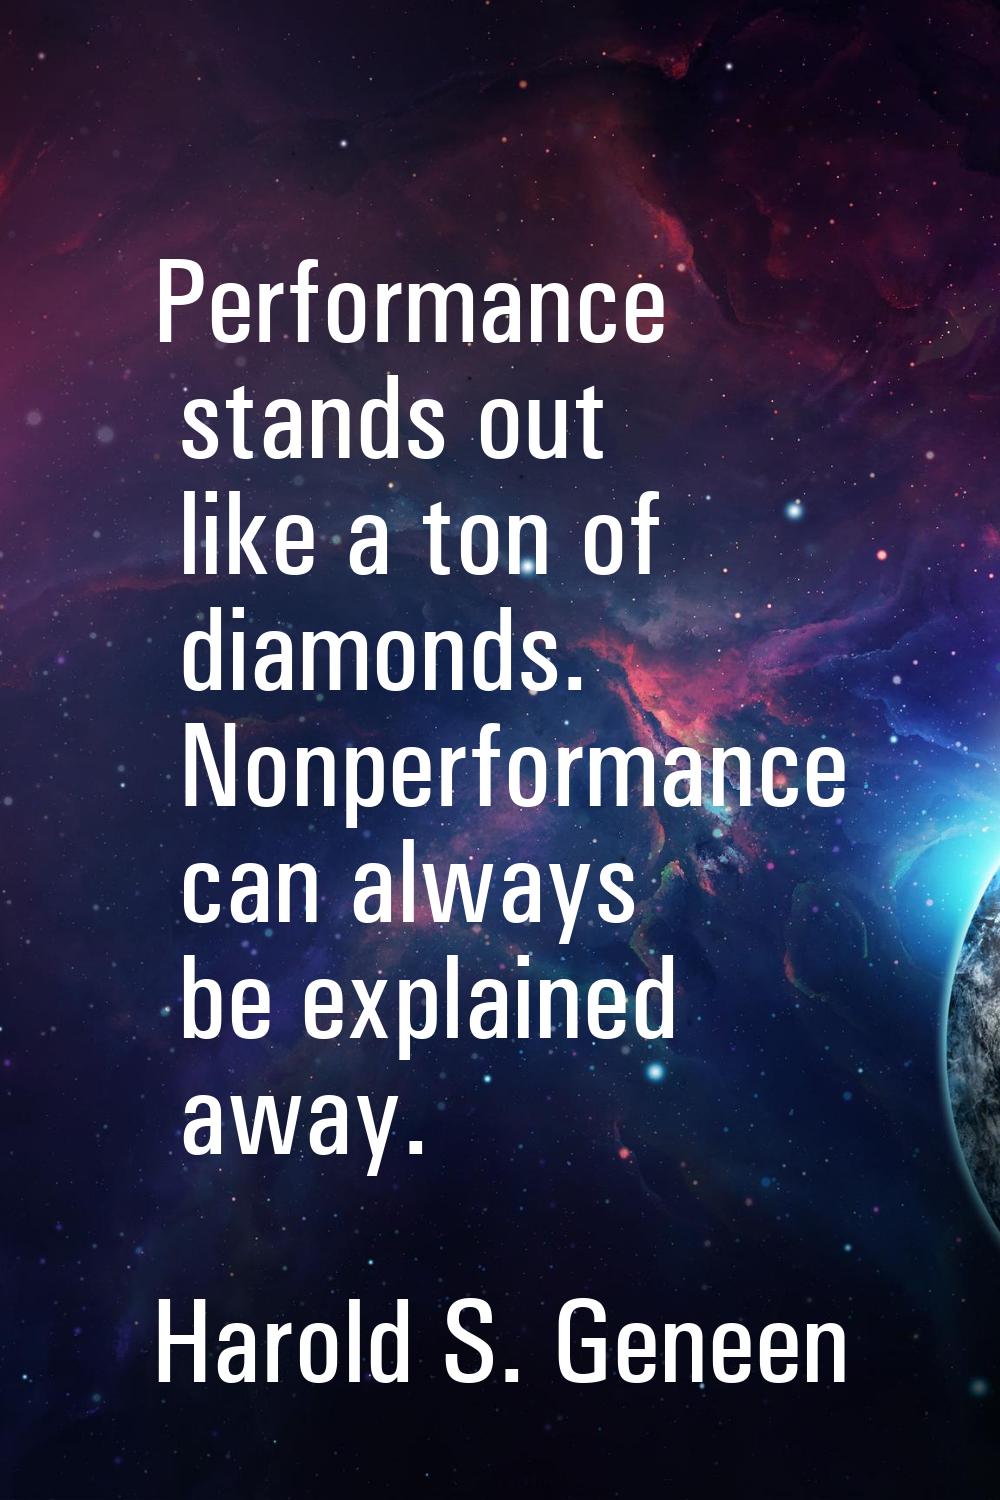 Performance stands out like a ton of diamonds. Nonperformance can always be explained away.